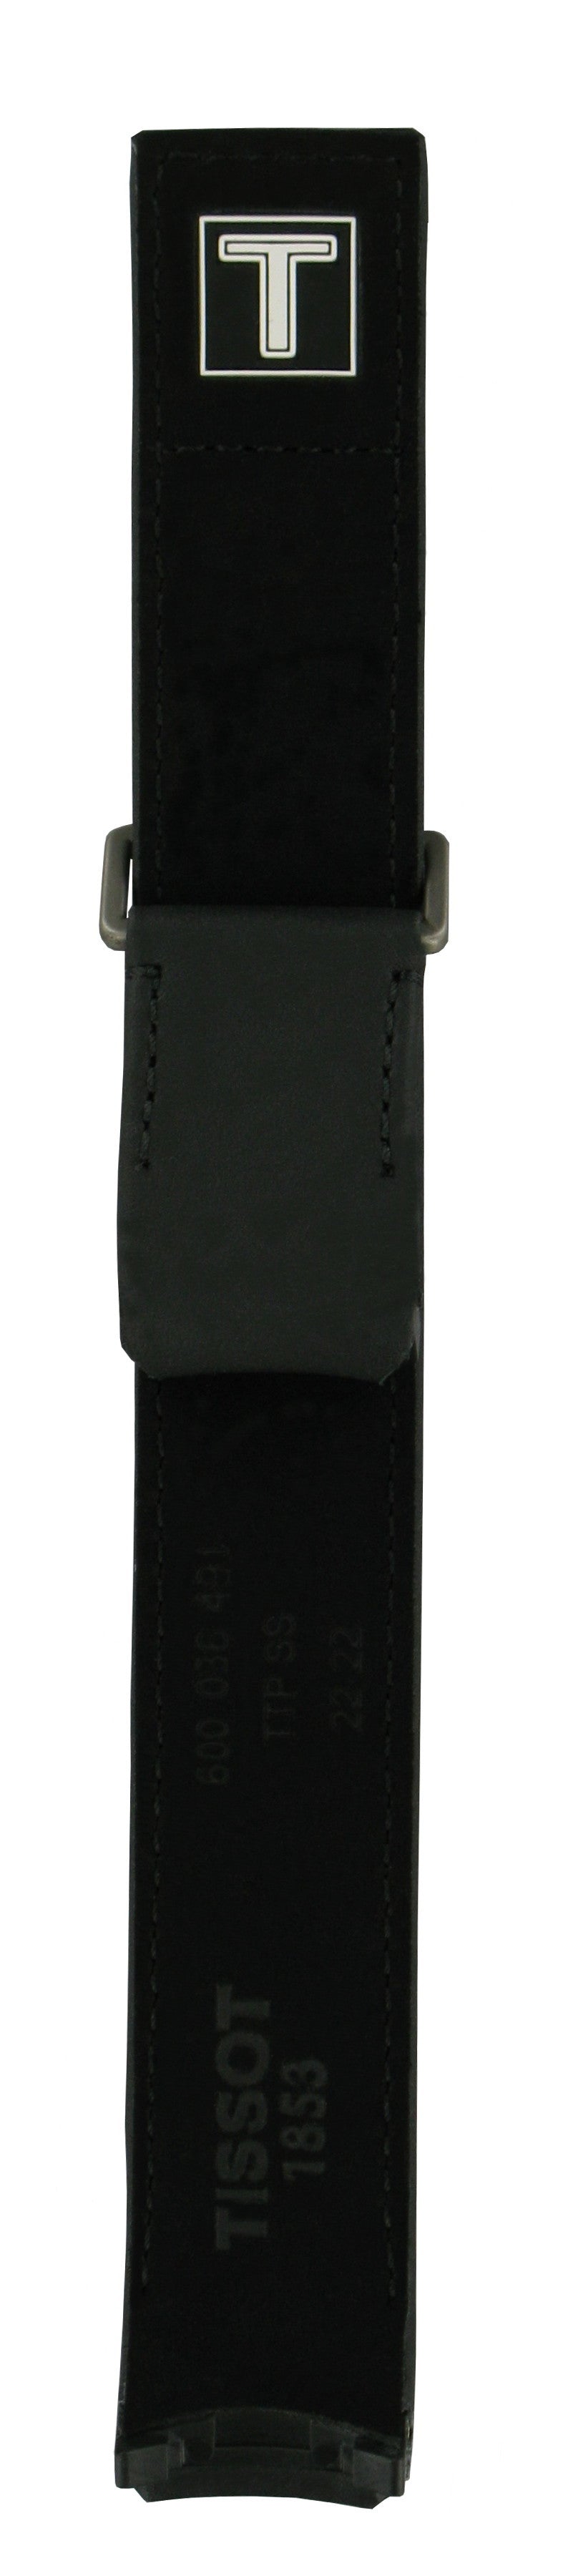 Tissot Solar T-Touch Expert Black Leather Band Strap - WATCHBAND EXPERT